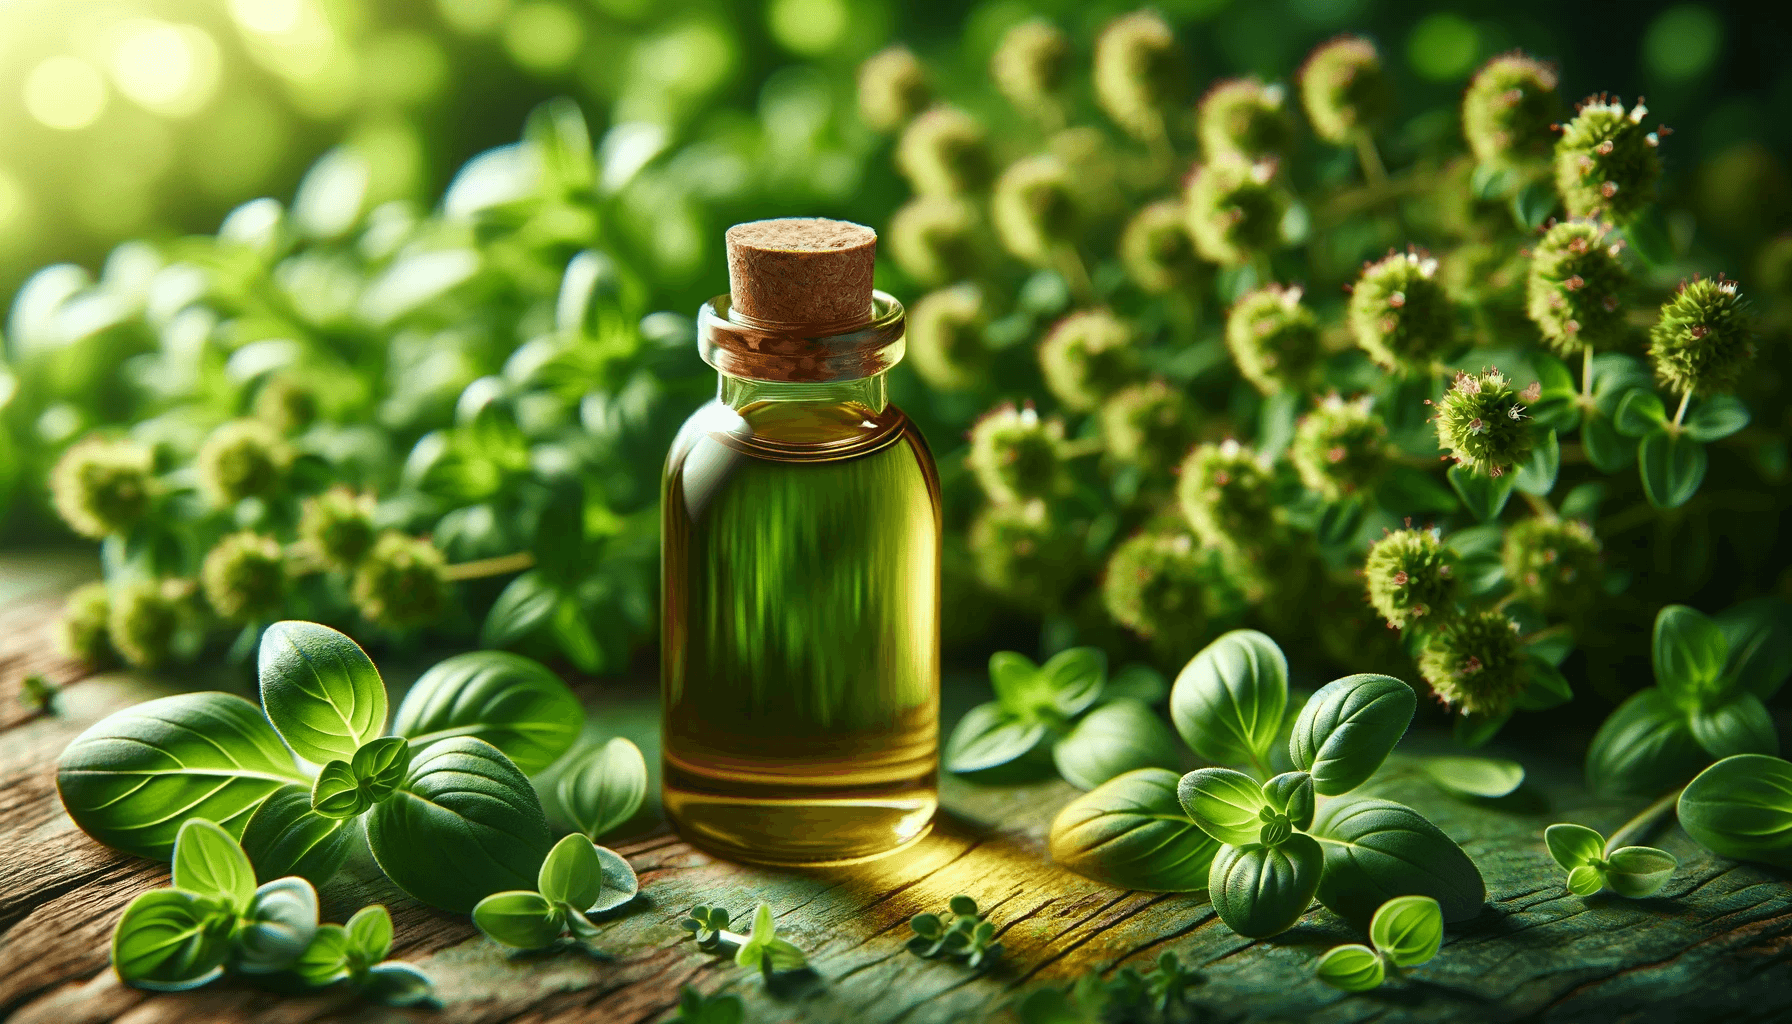 Oregano oil bottle in the foreground blending nature and health, emphasizing the synergy of natural ingredients in wellness products.